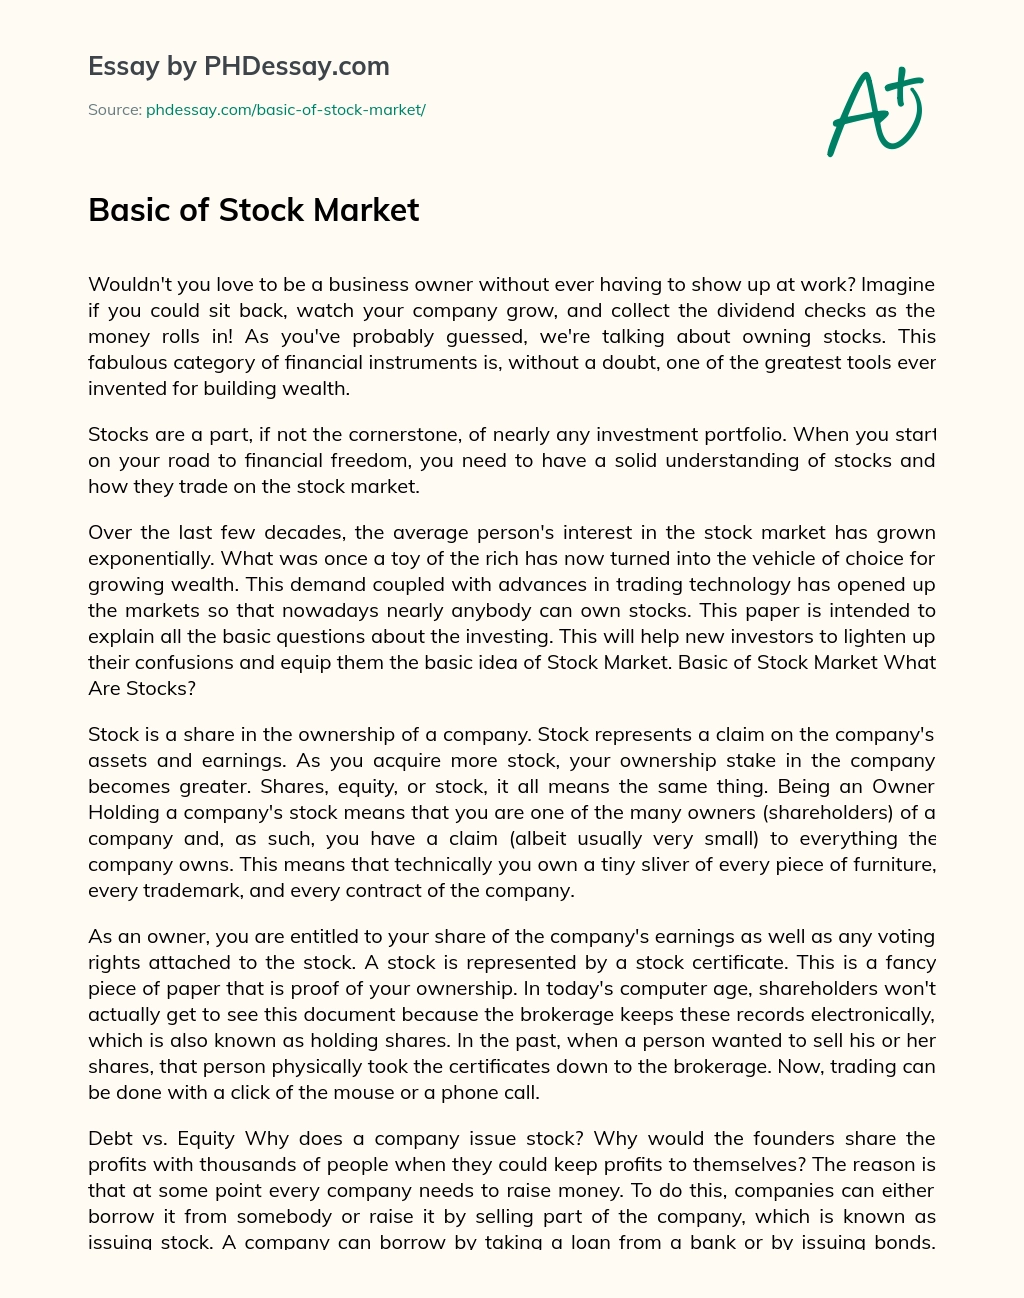 essay about investing in stock market